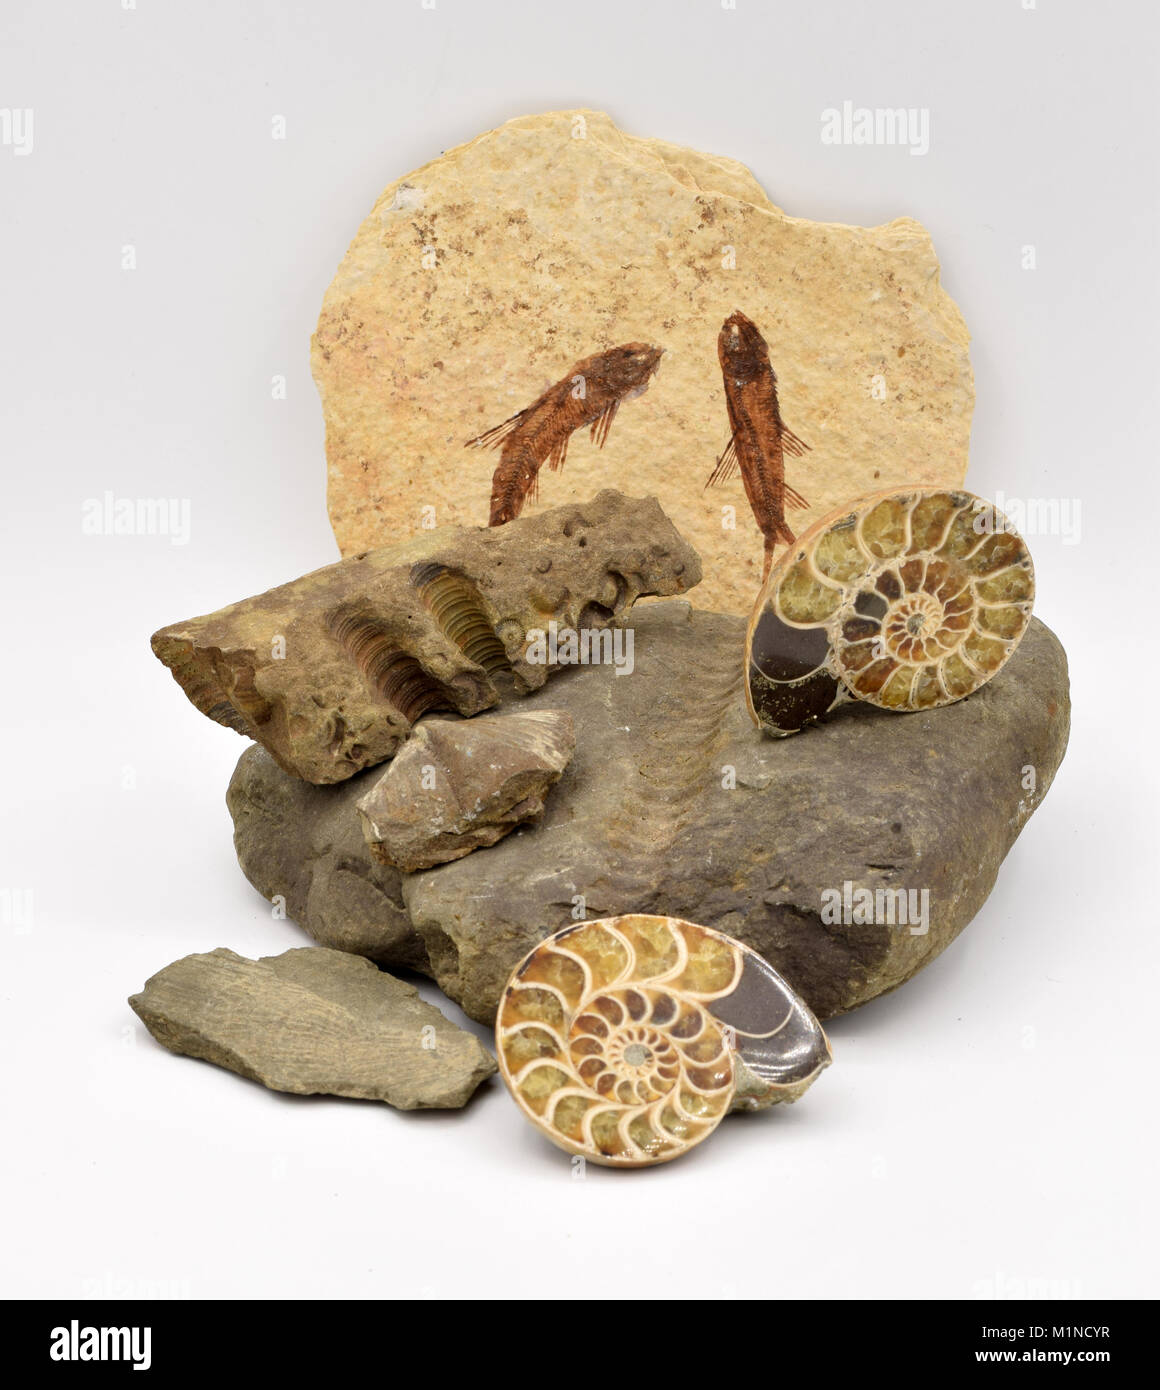 Fossils arranged on a seamless white background, including brachiopods, nautilus, crinoids, and fish, on a seamless white background. Stock Photo